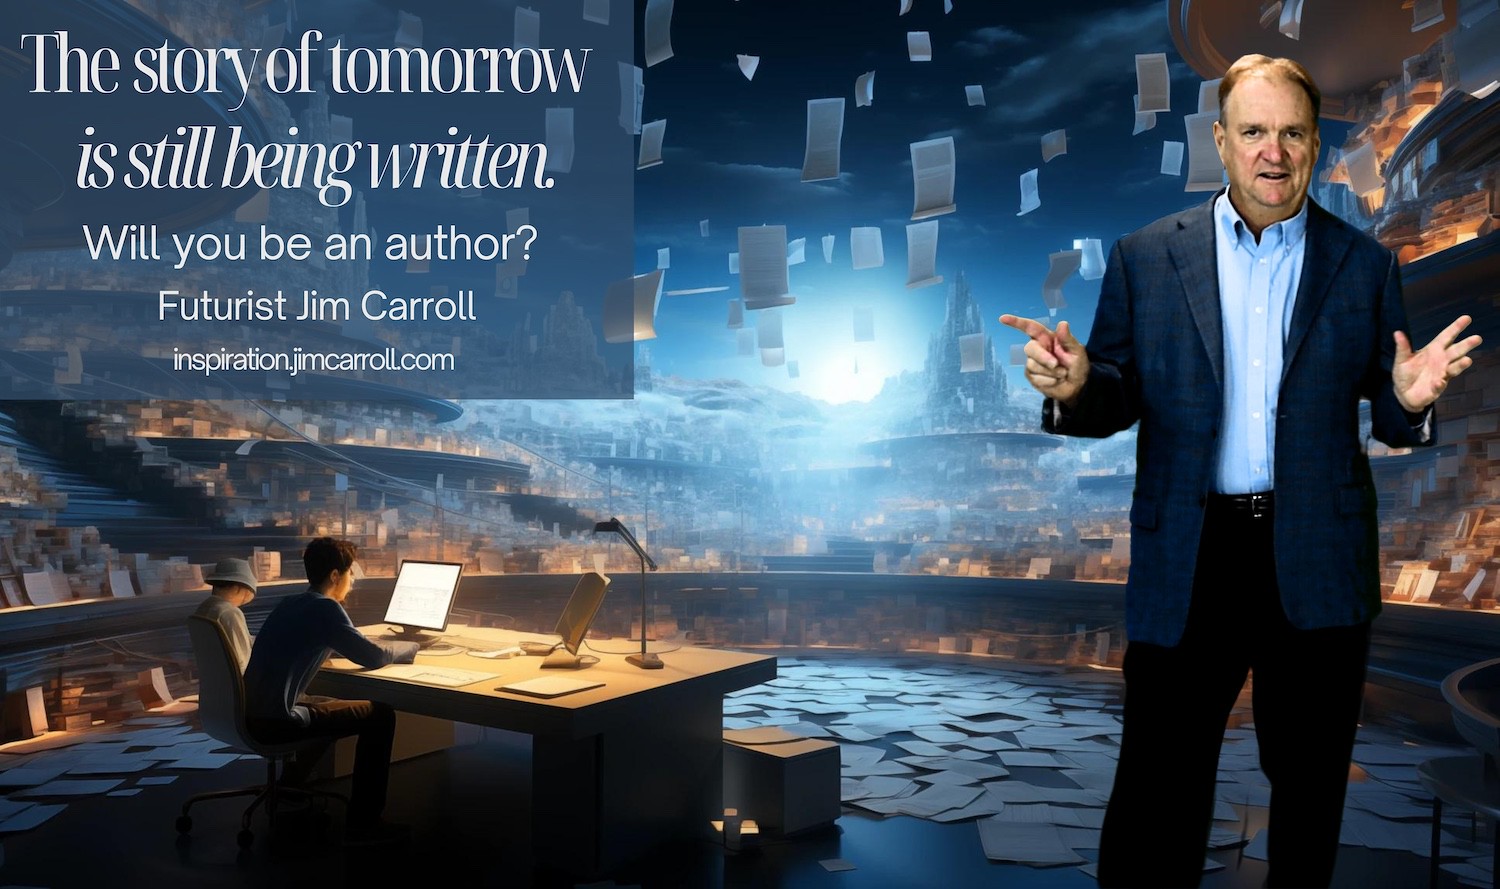 "The story of tomorrow is still being written. Will you be an author?" - Futurist Jim Carroll